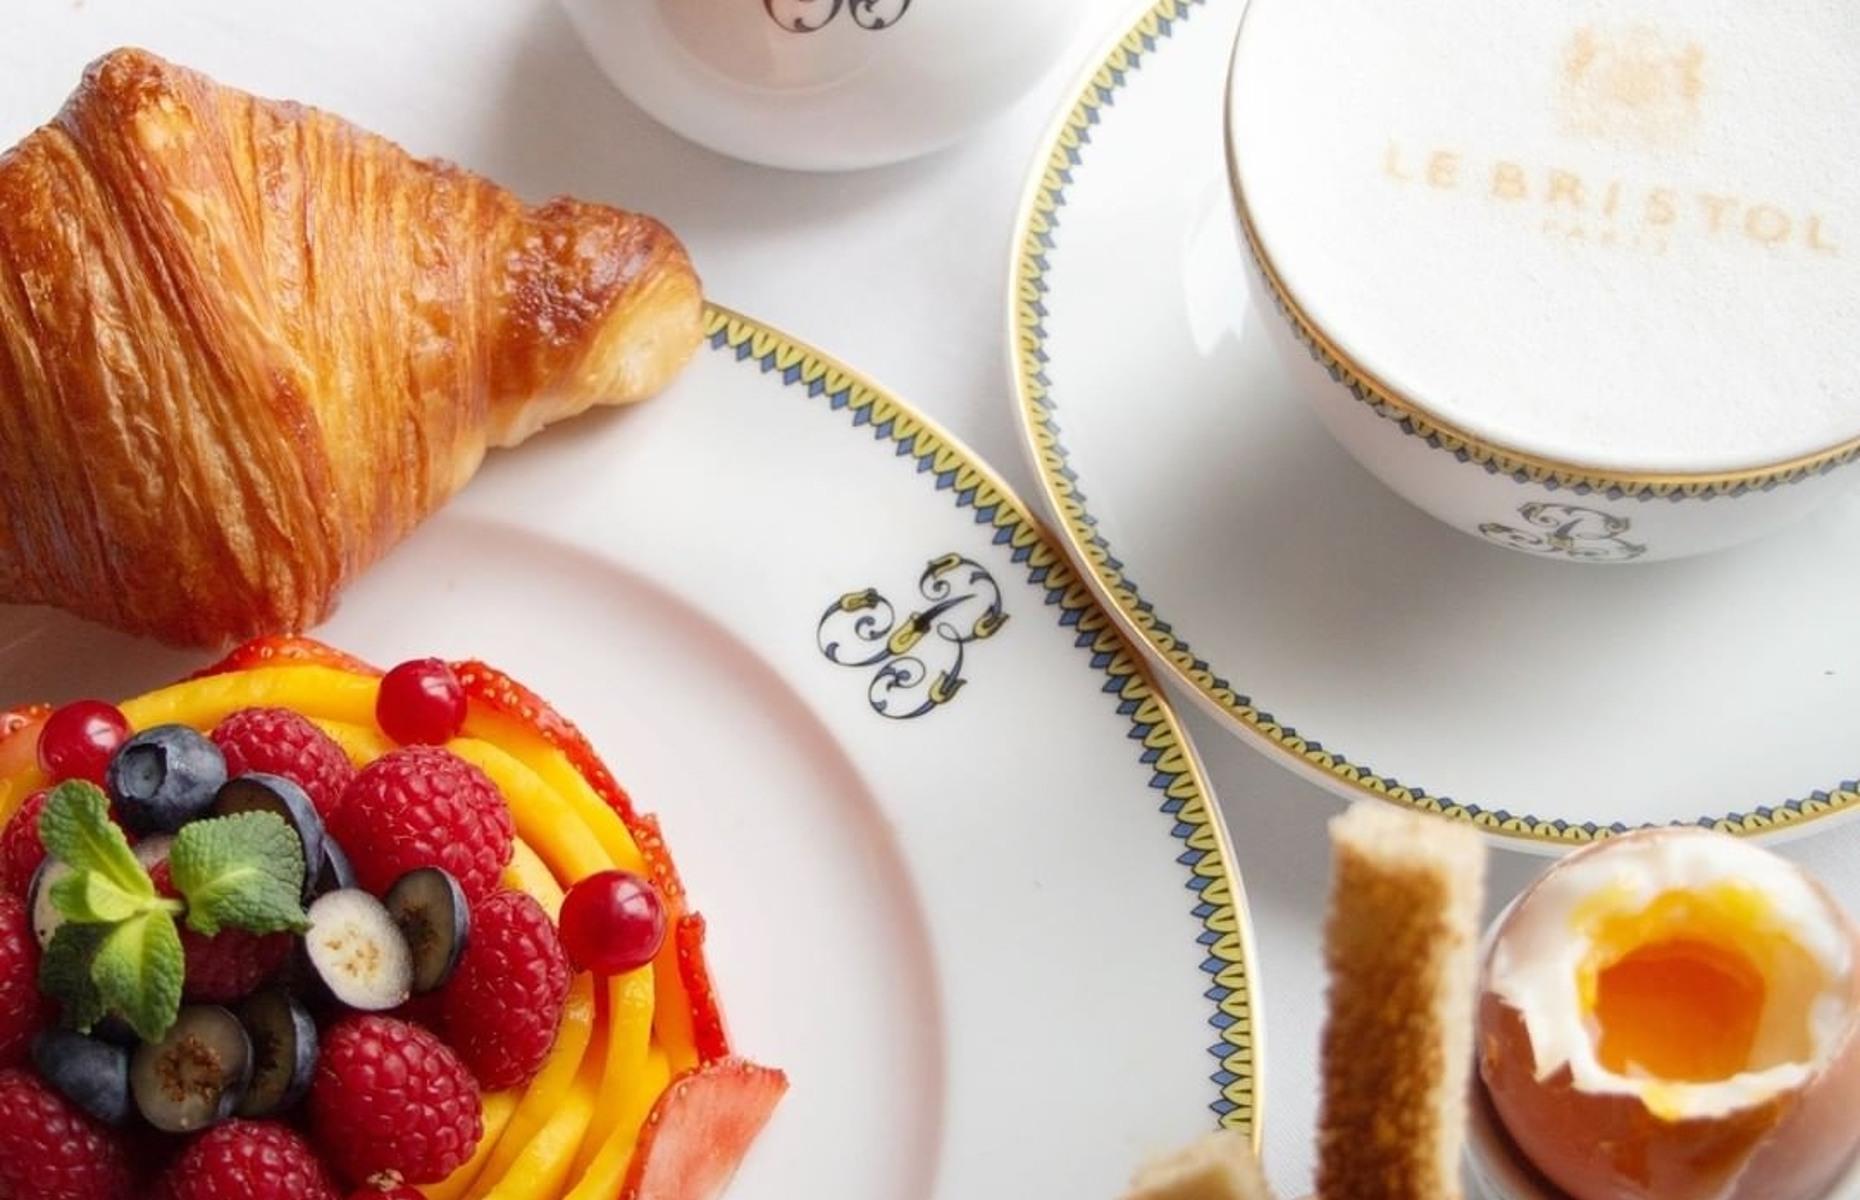 <p>Paris is for (food) lovers and at <a href="https://www.oetkercollection.com/hotels/le-bristol-paris/">Le Bristol</a>, a luxury hotel in the 8th arrondissement, there are two potential places to try a particularly exquisite breakfast. Epicure, the hotel’s three Michelin-starred restaurant, is all about quintessential Parisian indulgence: think Champagne and soft-boiled eggs with caviar. A more modest affair awaits at Café Antonia, which offers a continental breakfast, an American breakfast, fresh fruit salad, eggs cooked to your preference, Viennoiserie, cheese plates, pain perdu and so much more. Needless to say, this all comes at an additional cost.</p>